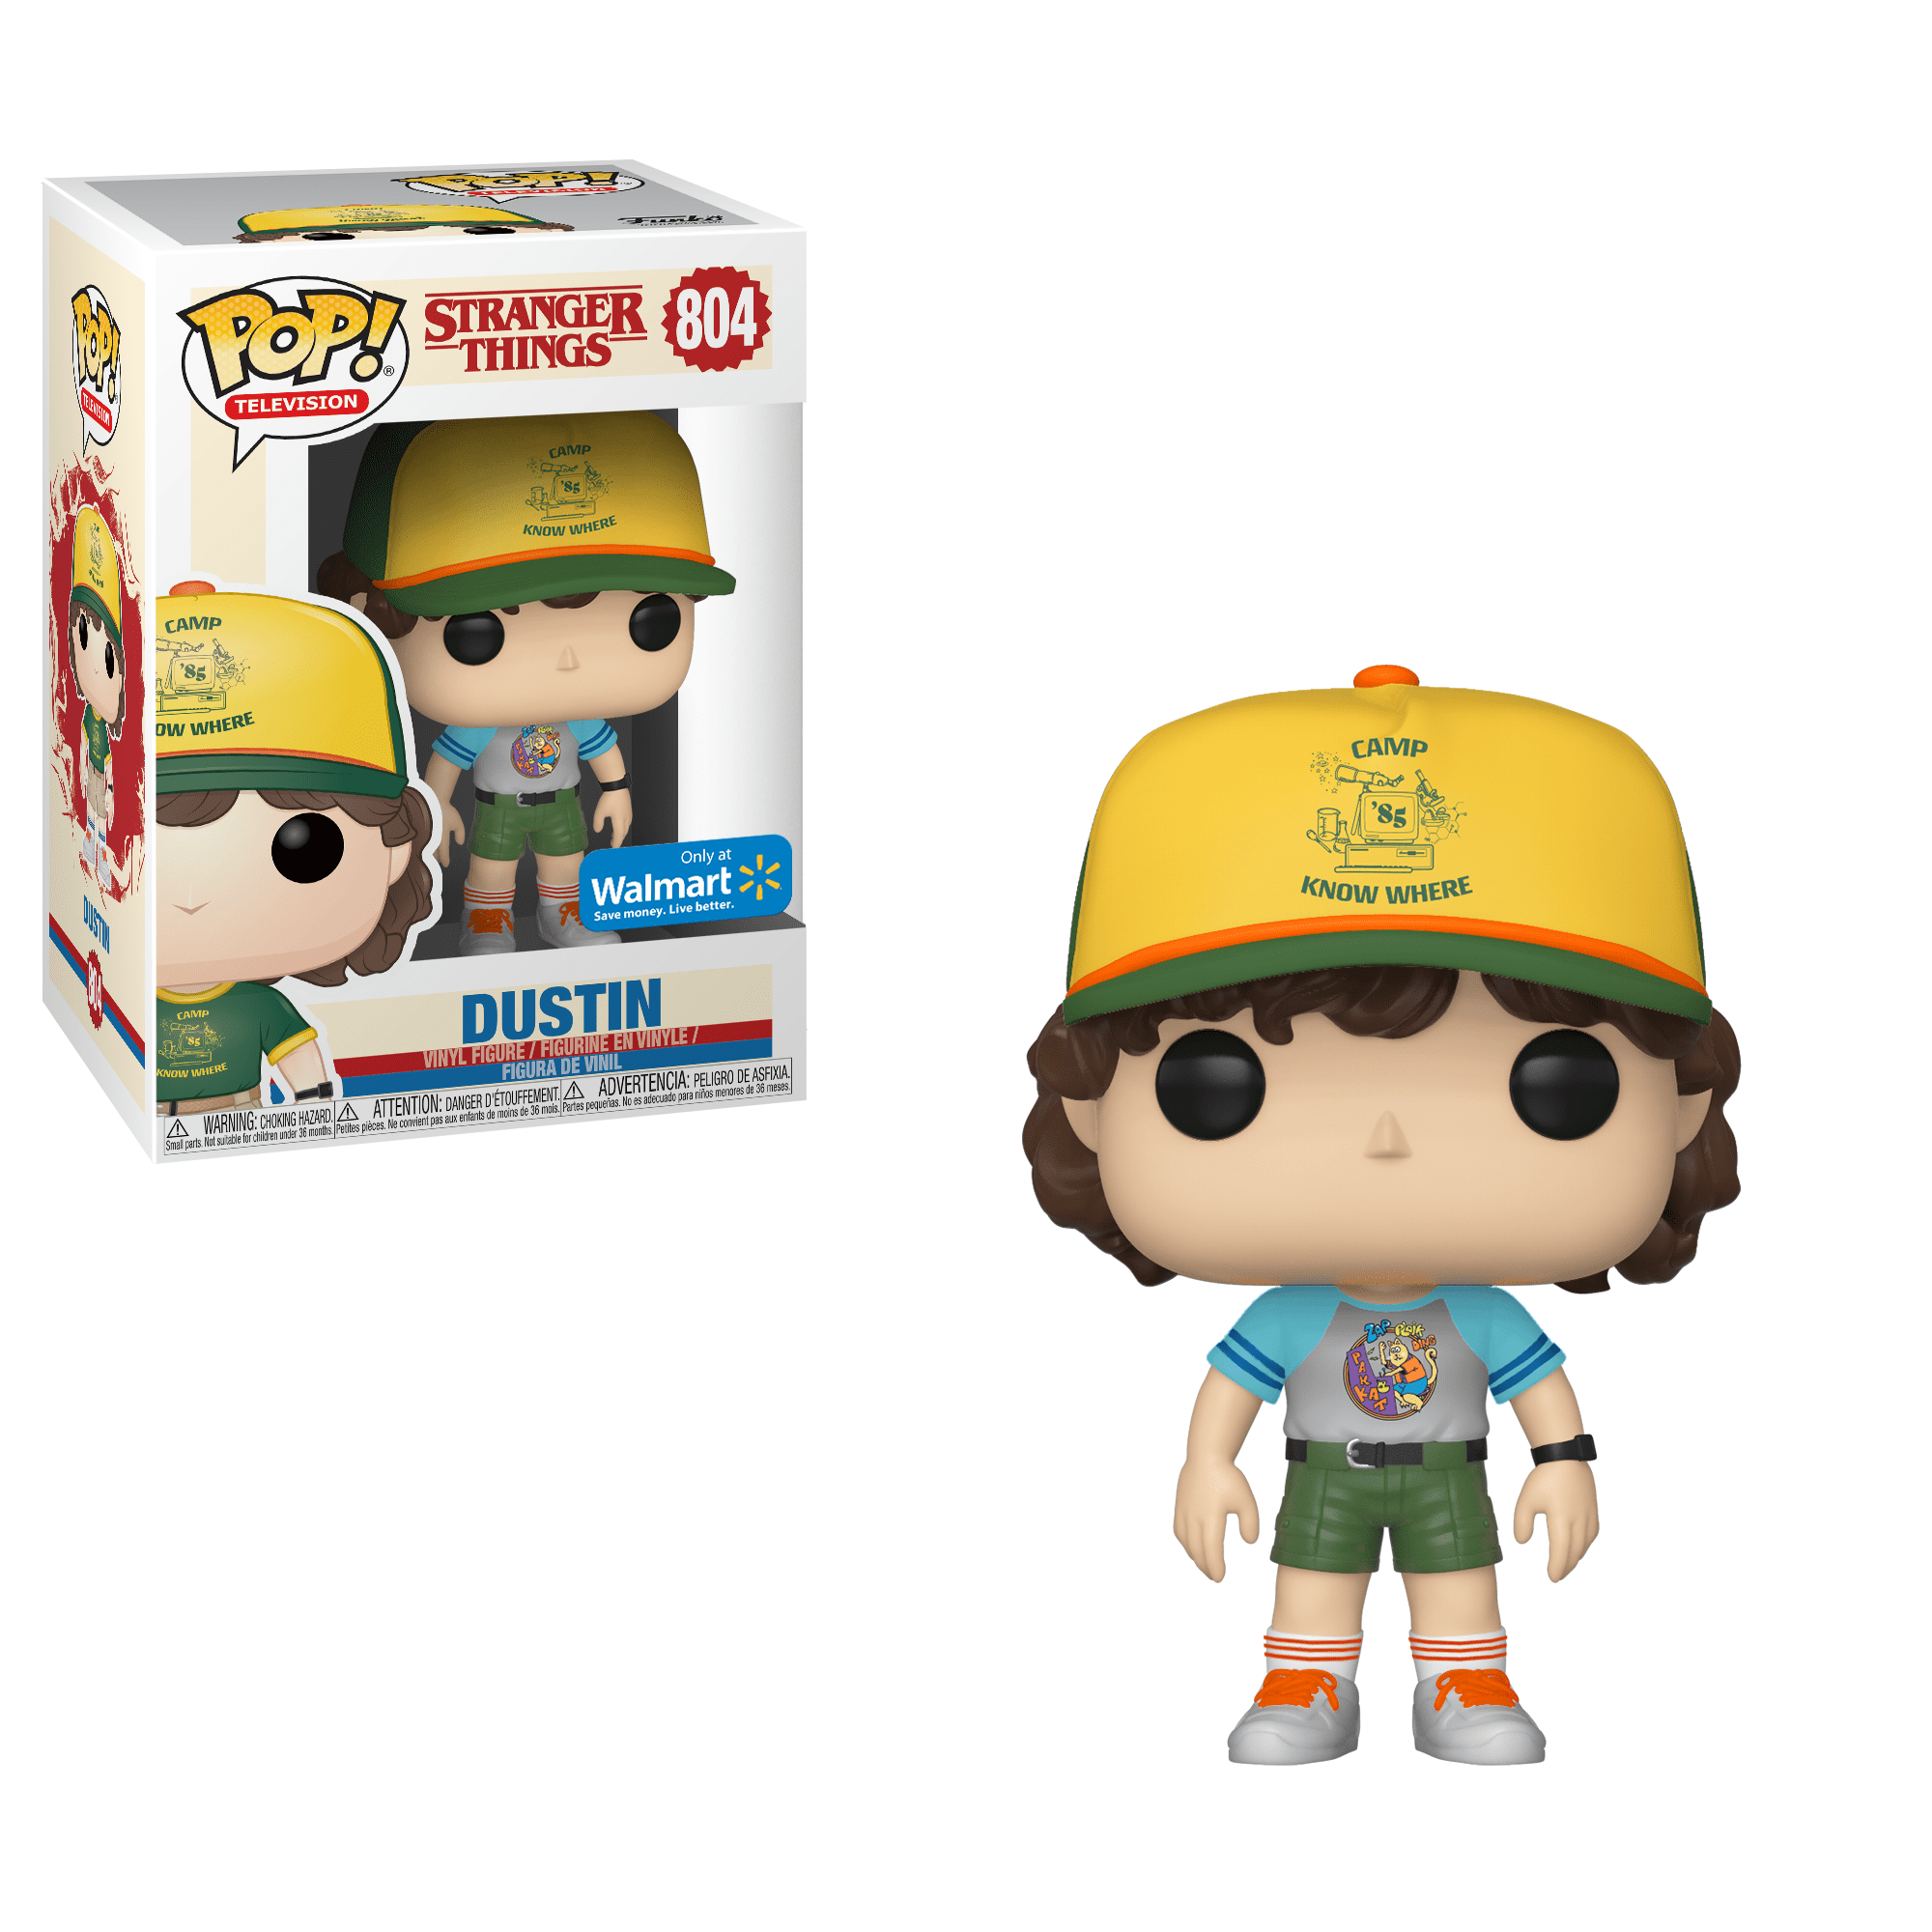 Stranger Things Funko Pop Collection – Drop And Give Me Nerdy